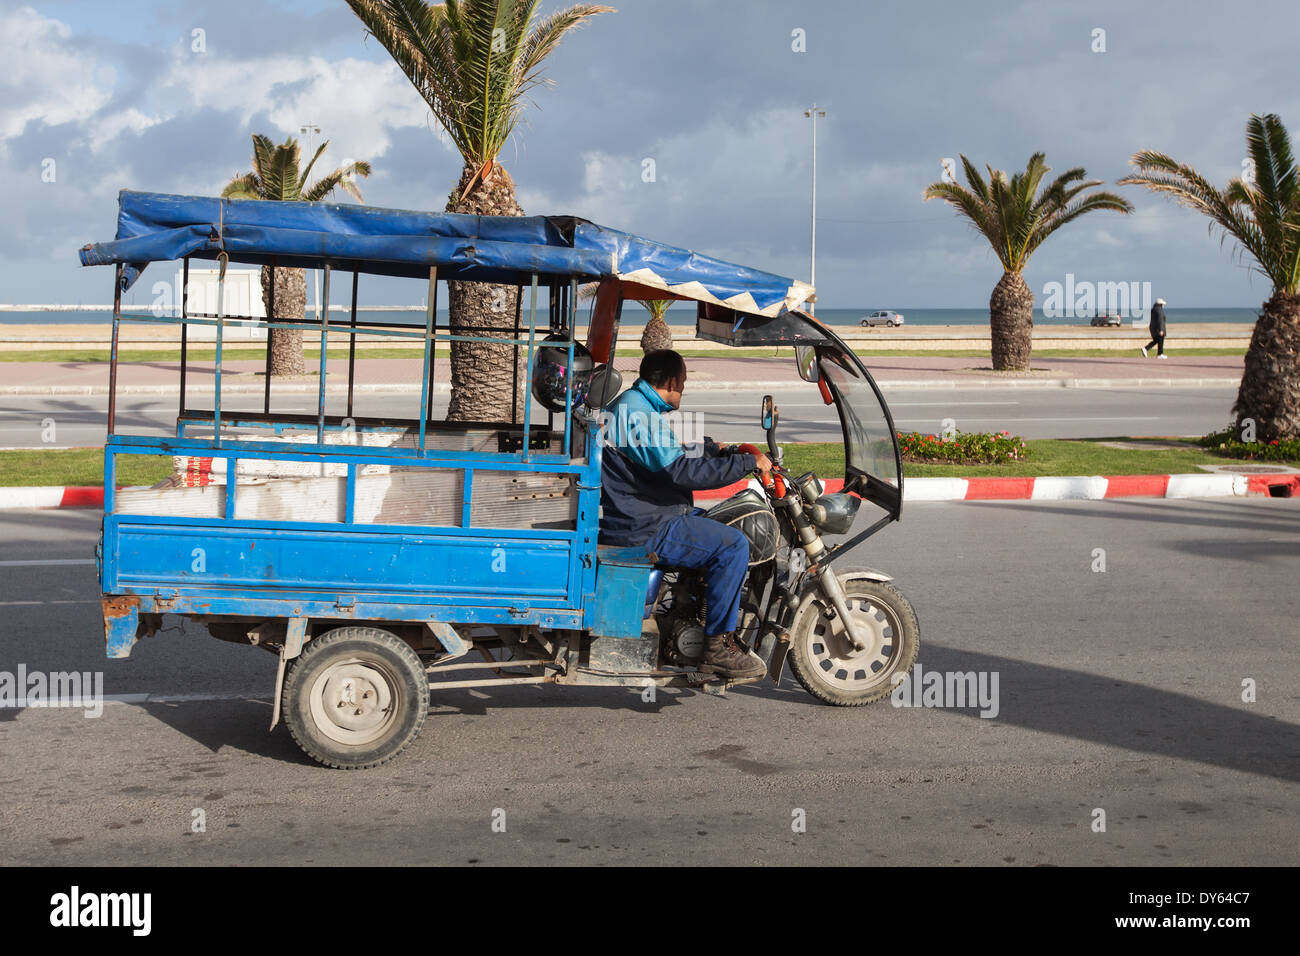 TANGIER, MOROCCO - MARCH 27, 2014: old blue tricycle cargo bike with Arab driver rides on the coastal street of  Tangier Stock Photo